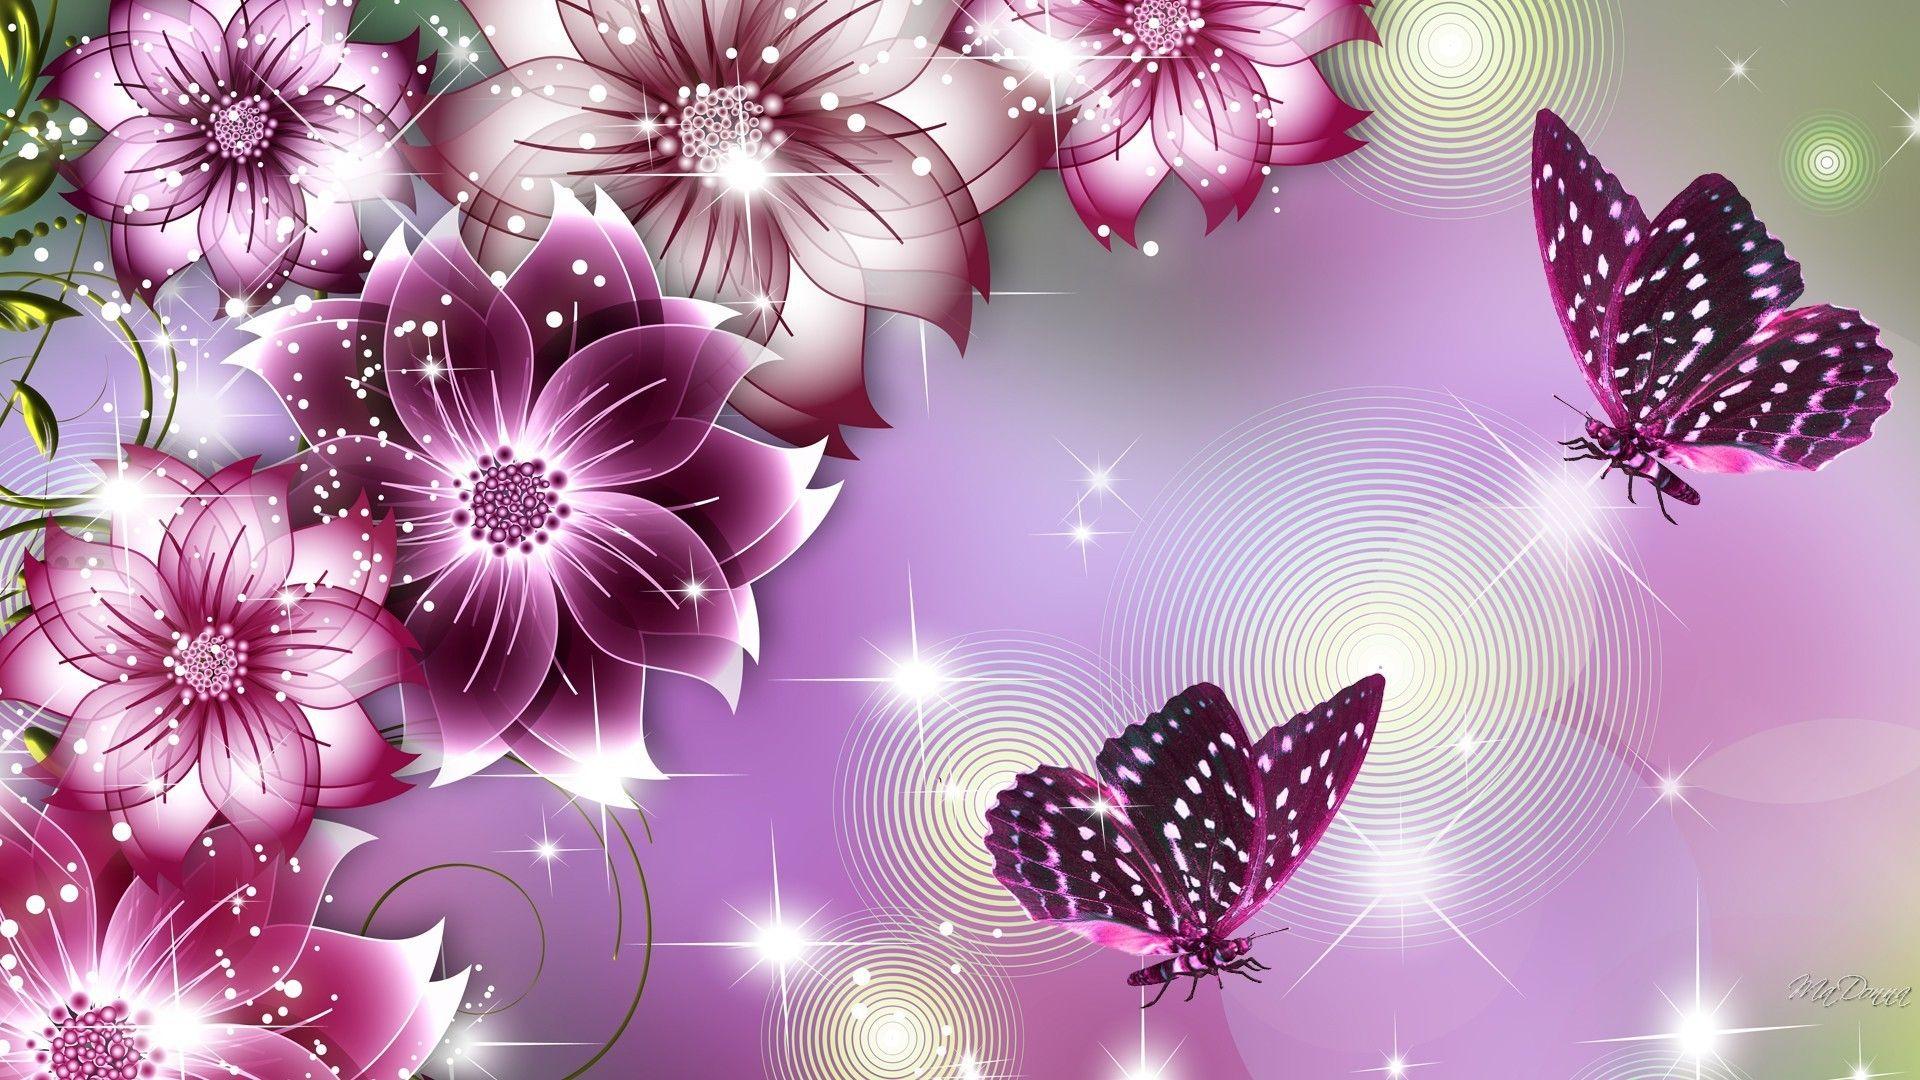 Flowers and Butterflies Wallpapers - Top Free Flowers and Butterflies